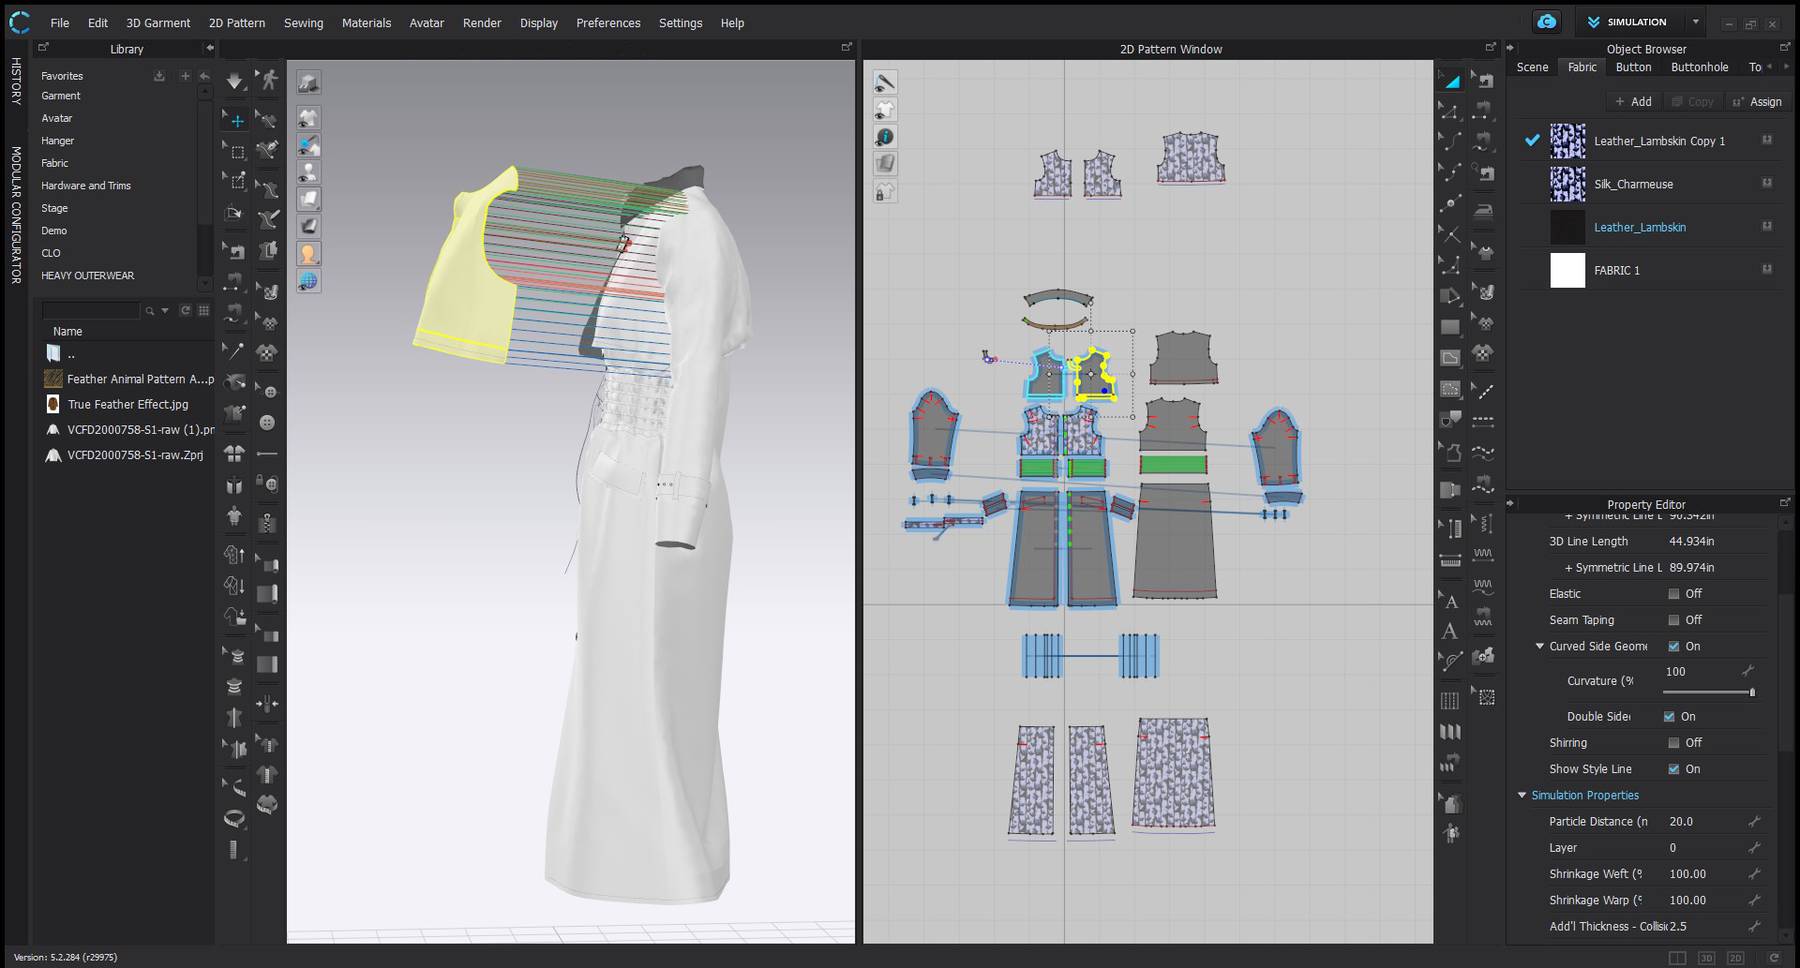 A shot of Clo3D's software showing a split screen with a rendering of a three-dimensional garment on the left, and on the right, its two-dimensional pattern pieces.